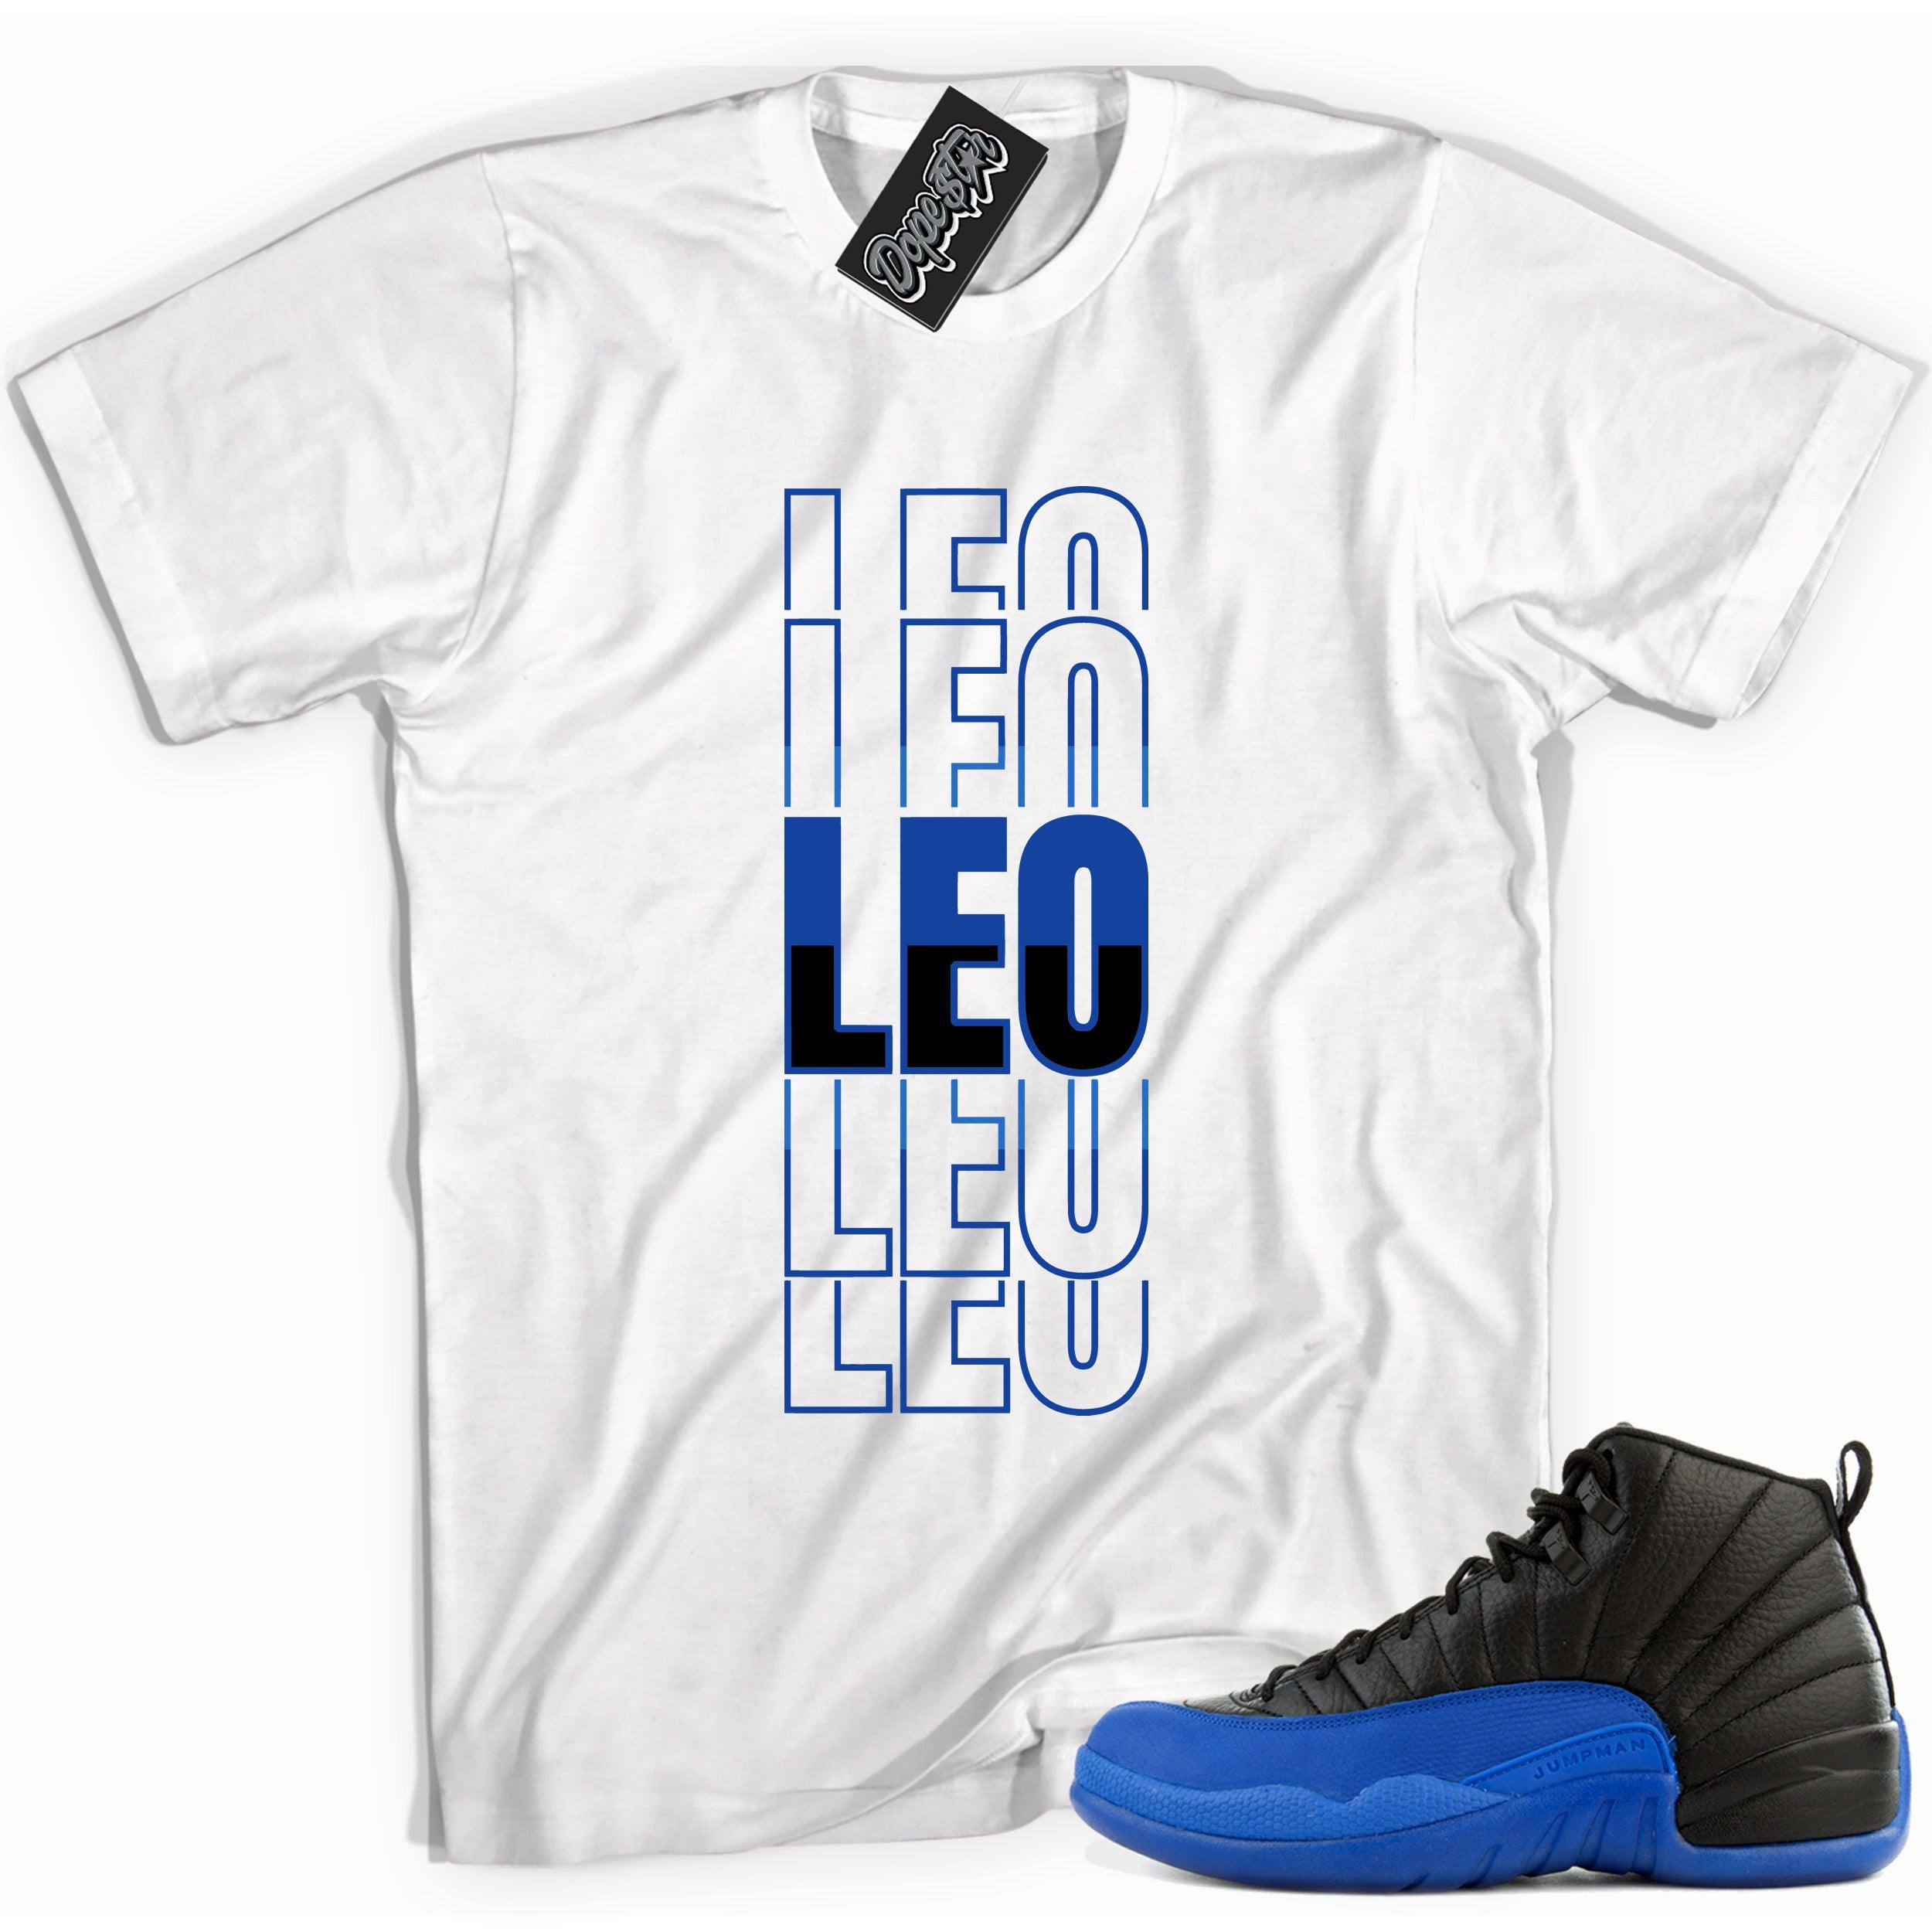 Cool white graphic tee with 'leo' print, that perfectly matches Air Jordan 12 Retro Black Game Royal sneakers.